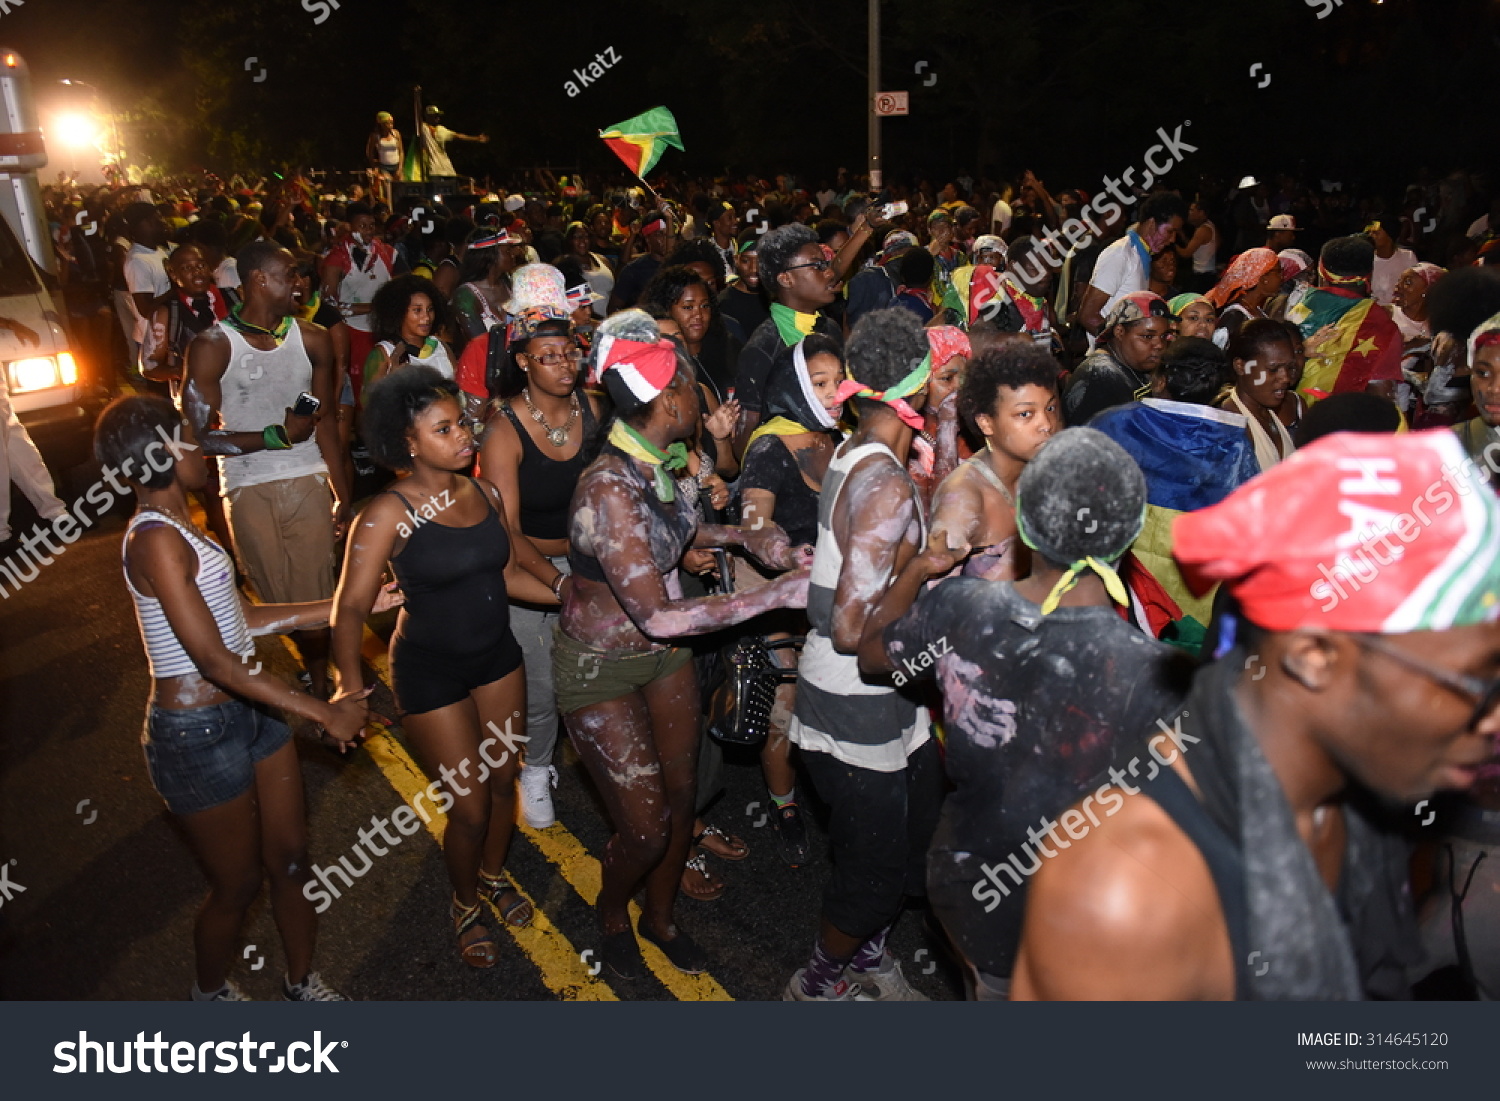 stock-photo-new-york-city-september-j-ouvert-is-an-annual-pre-dawn-celebration-prior-to-the-west-314645120.jpg